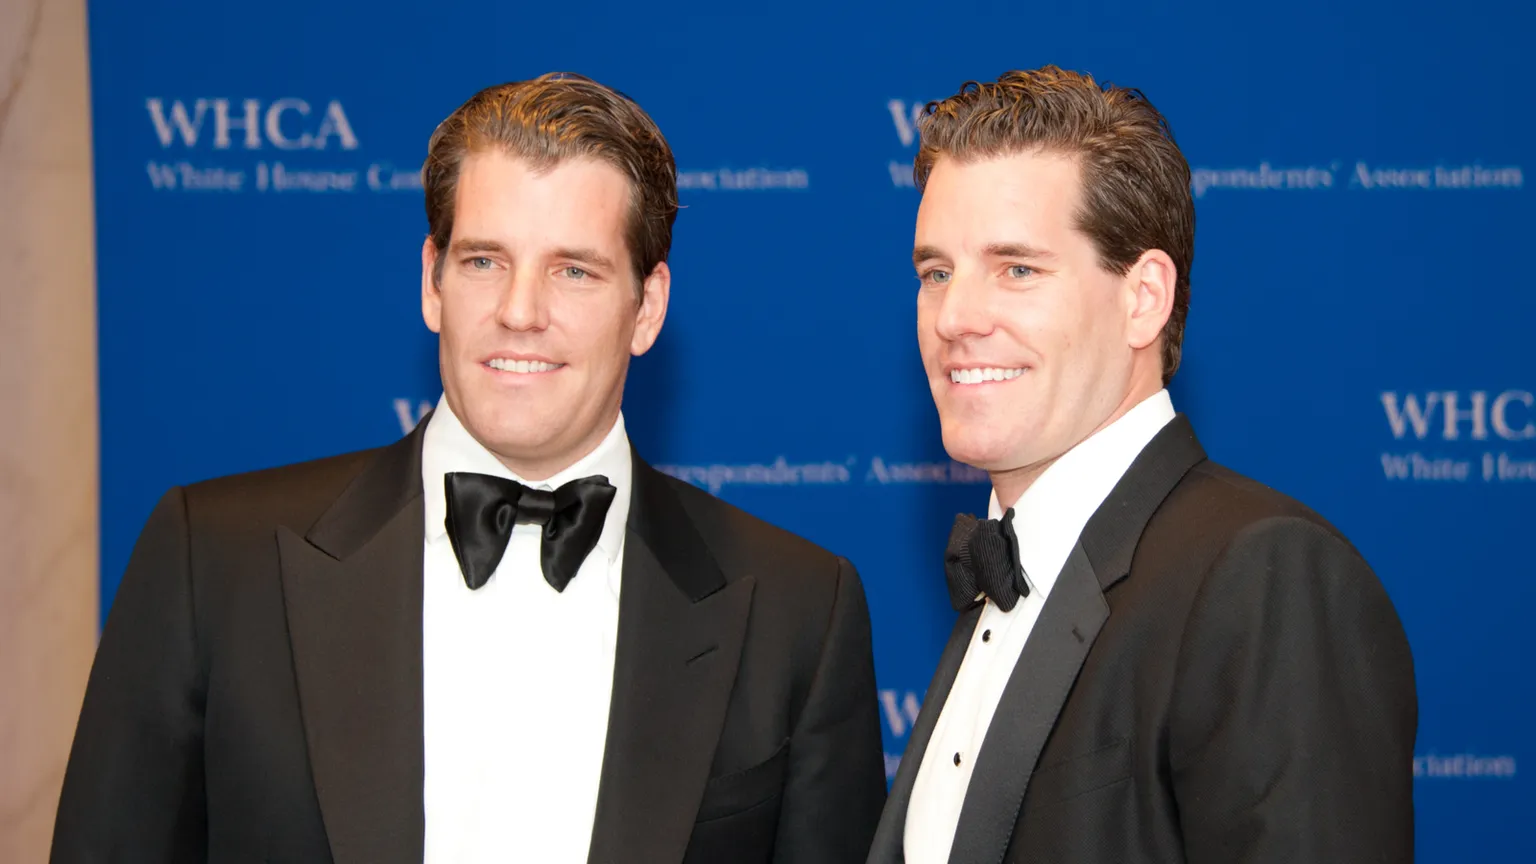 The Winklevoss twins co-founded the cryptocurrency exchange Gemini. Image: Shutterstock